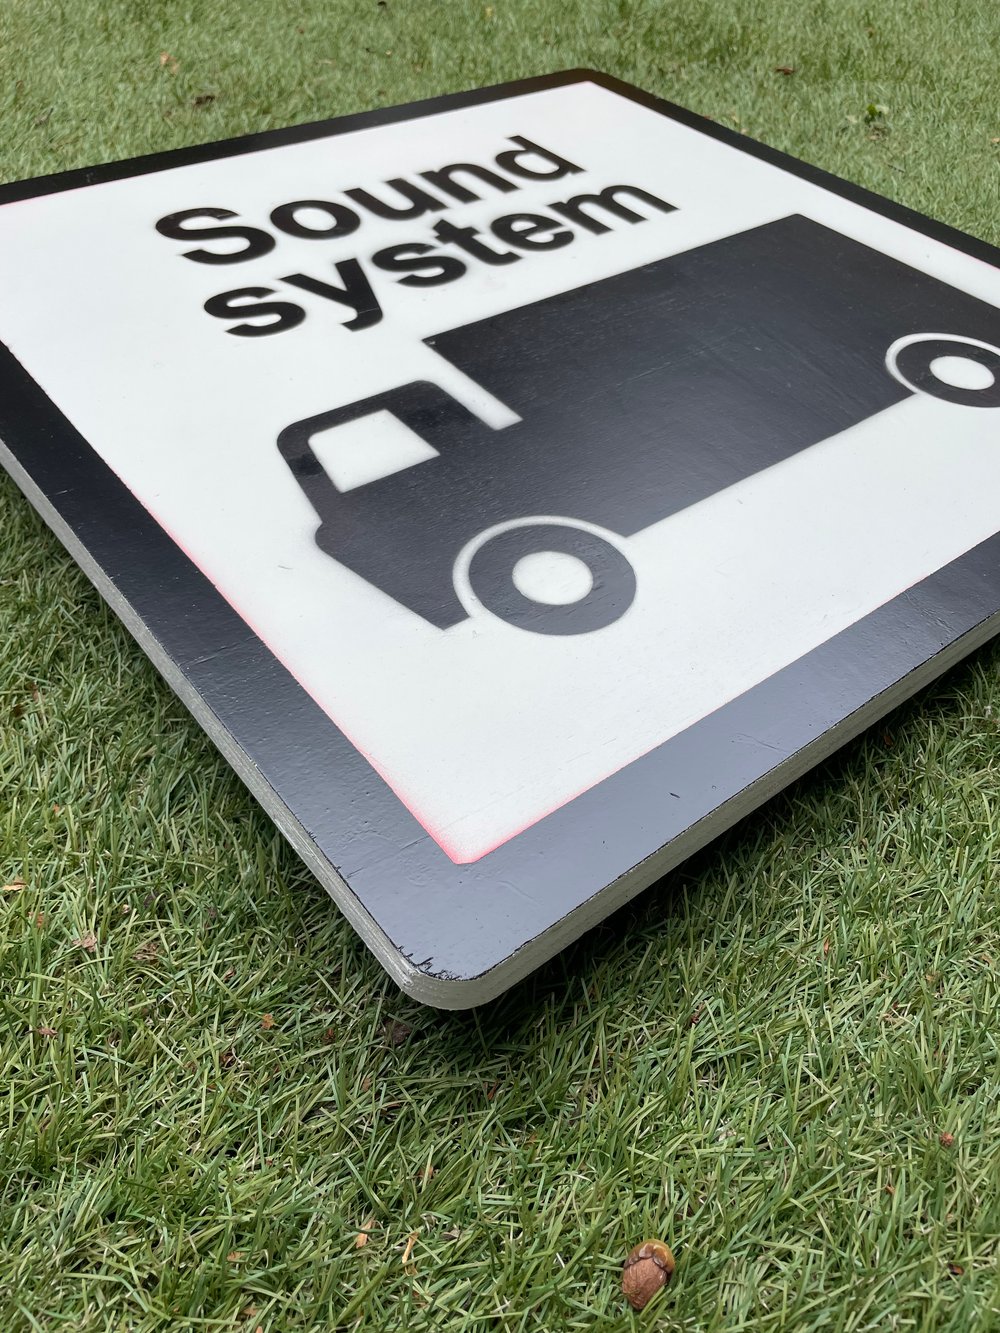 Image of Sound System street sign